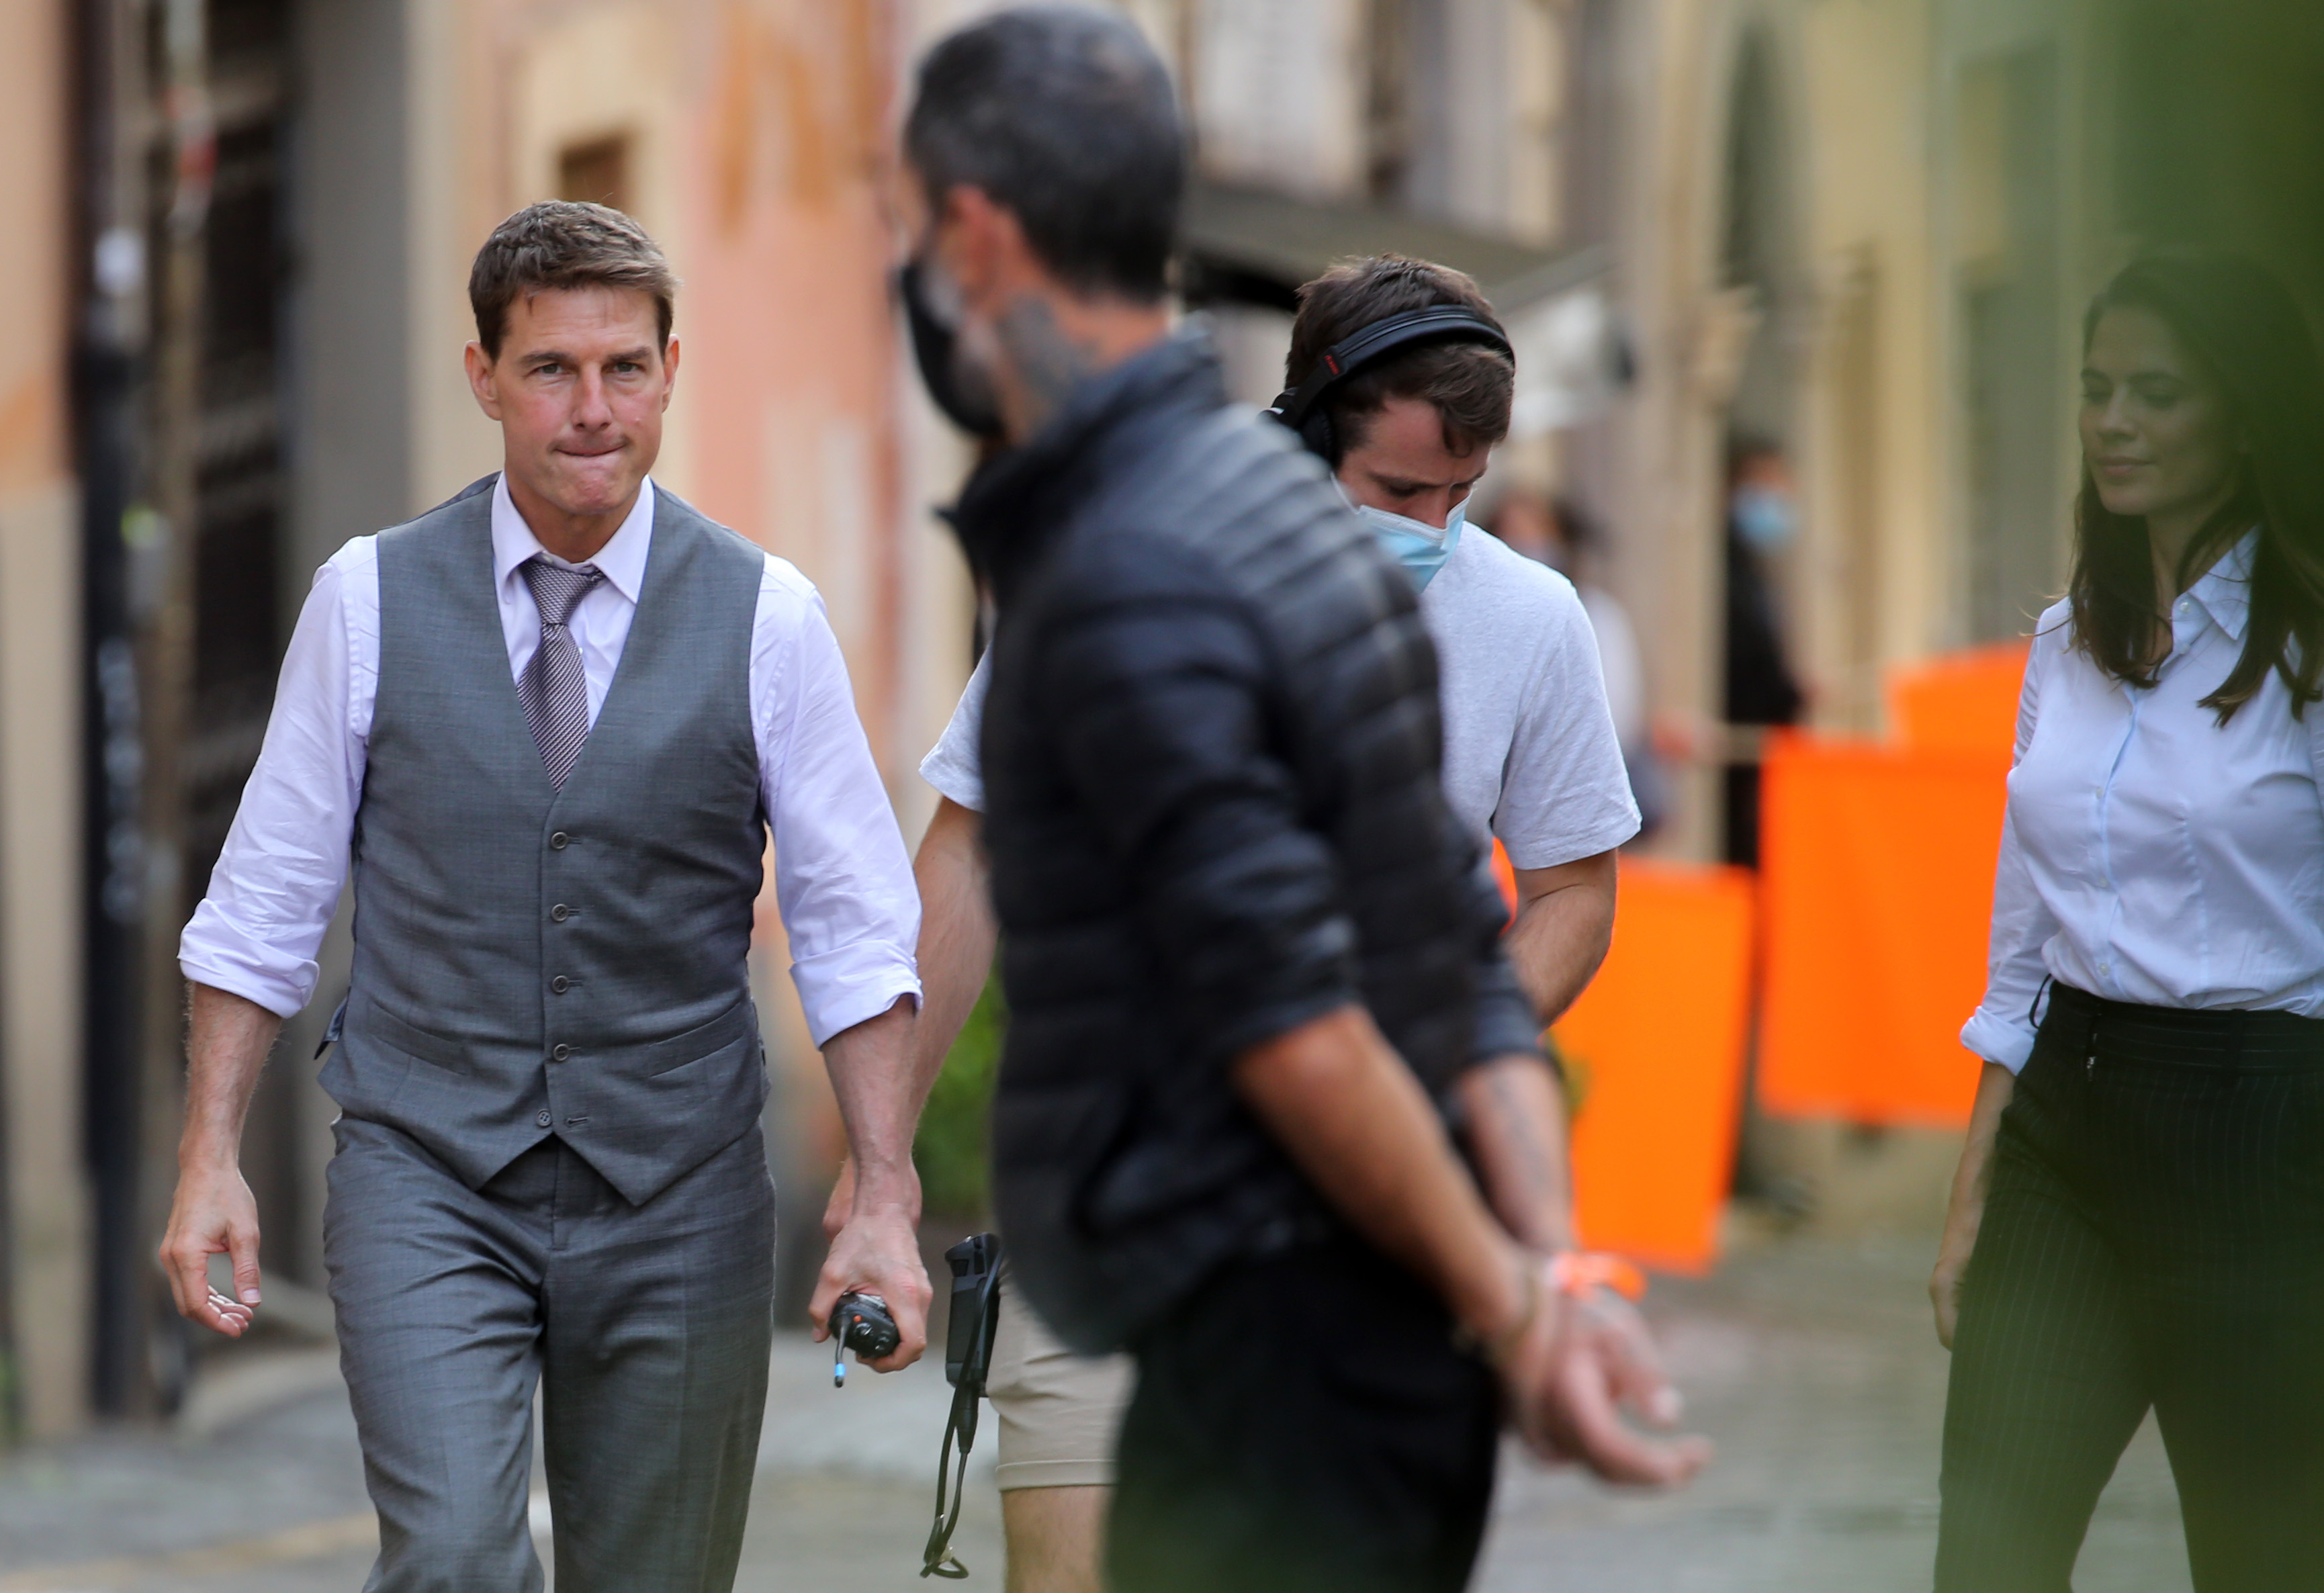 Tom Cruise and Hayley Atwell are seen on the set of the movie Mission Impossible 7.